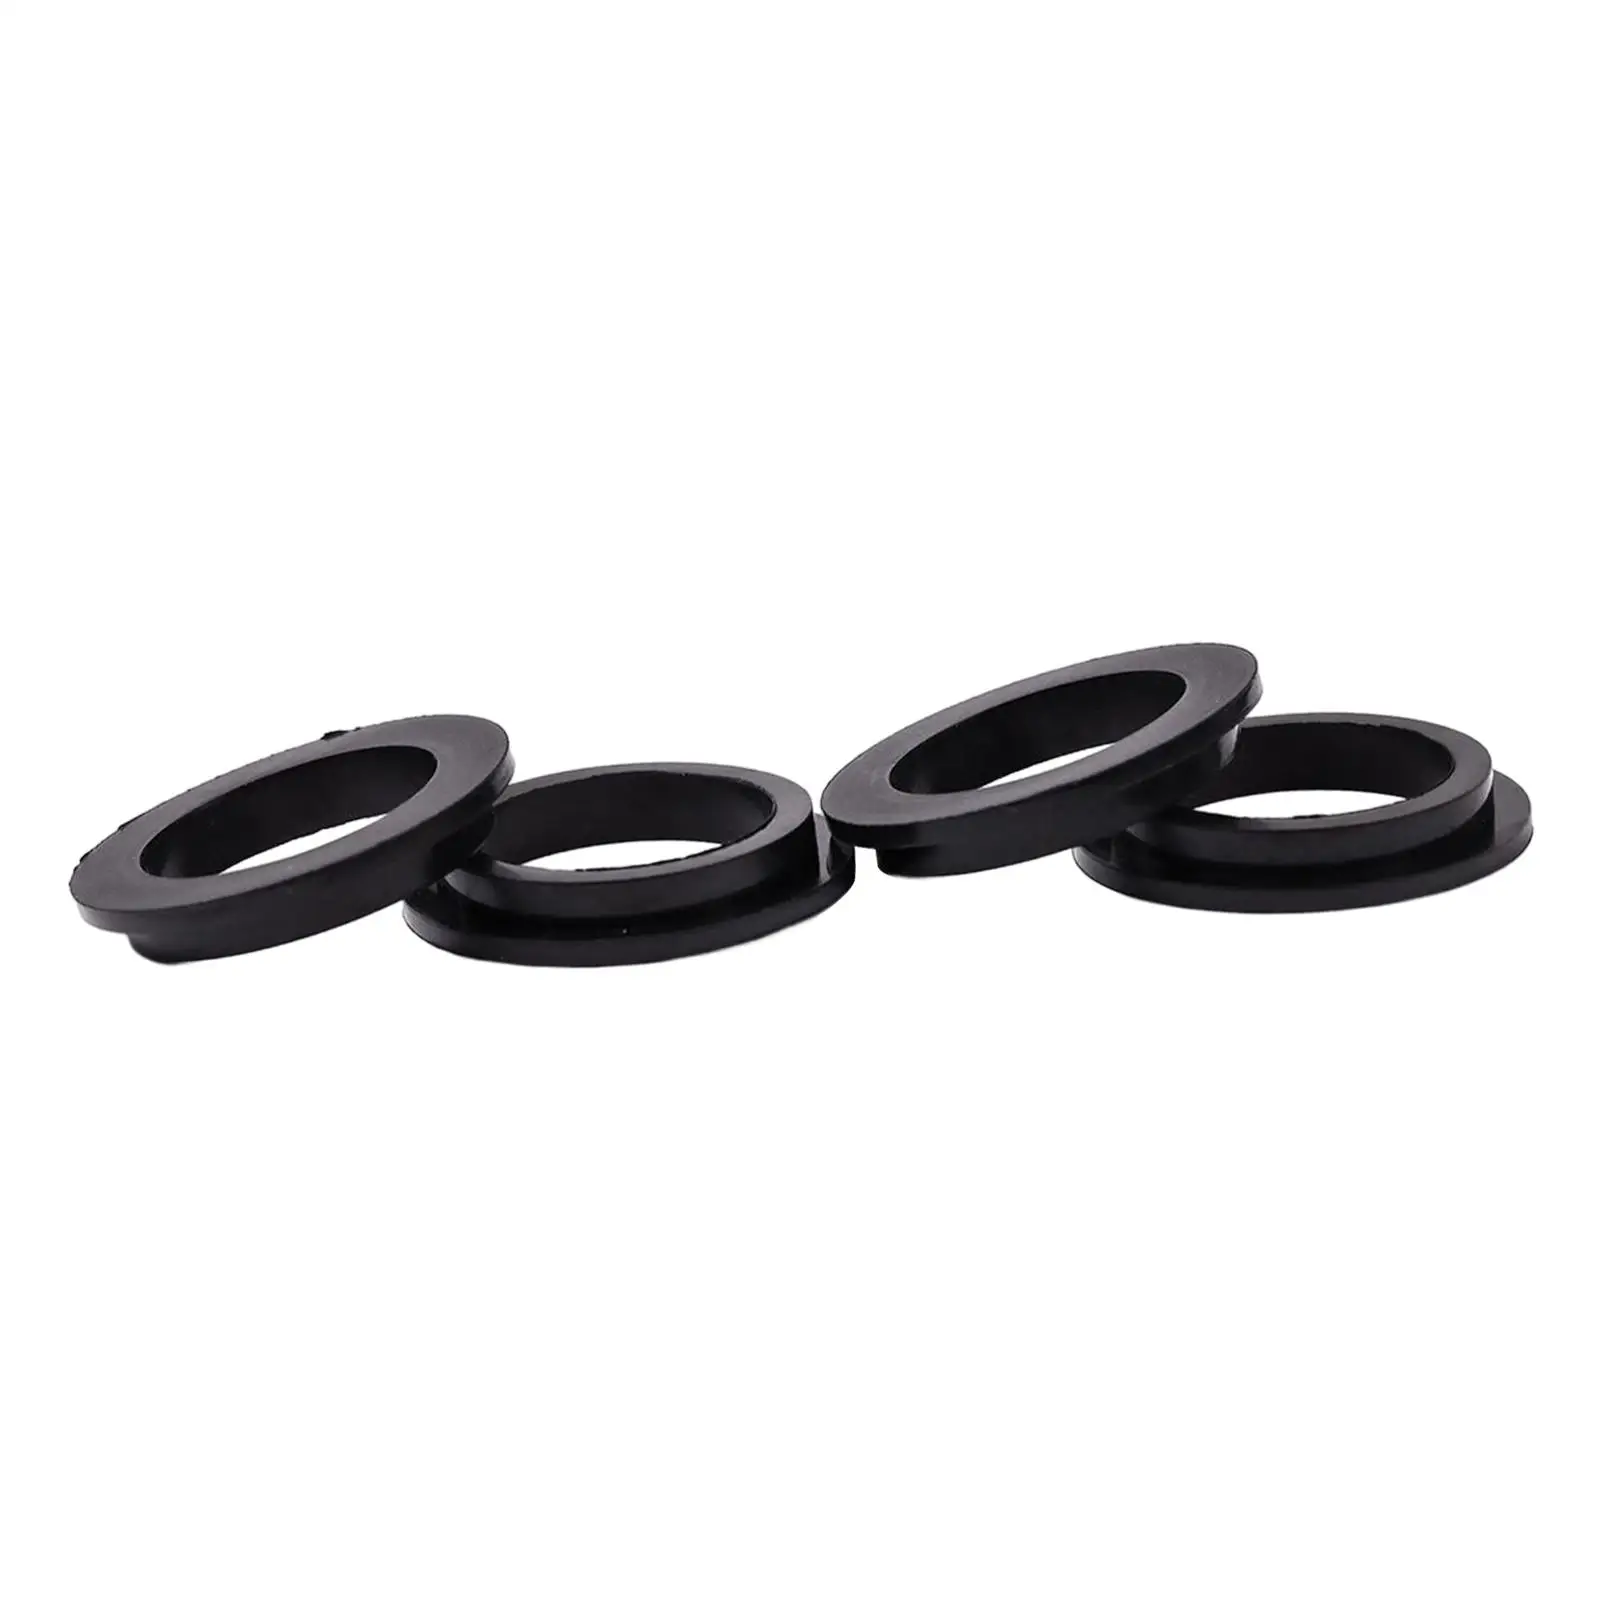 4x O Rings for Sand Filter Pump Part Number 11412 Replacement L Shaped Repair for Sand Filter Pump Pool Filter Pump O Rings